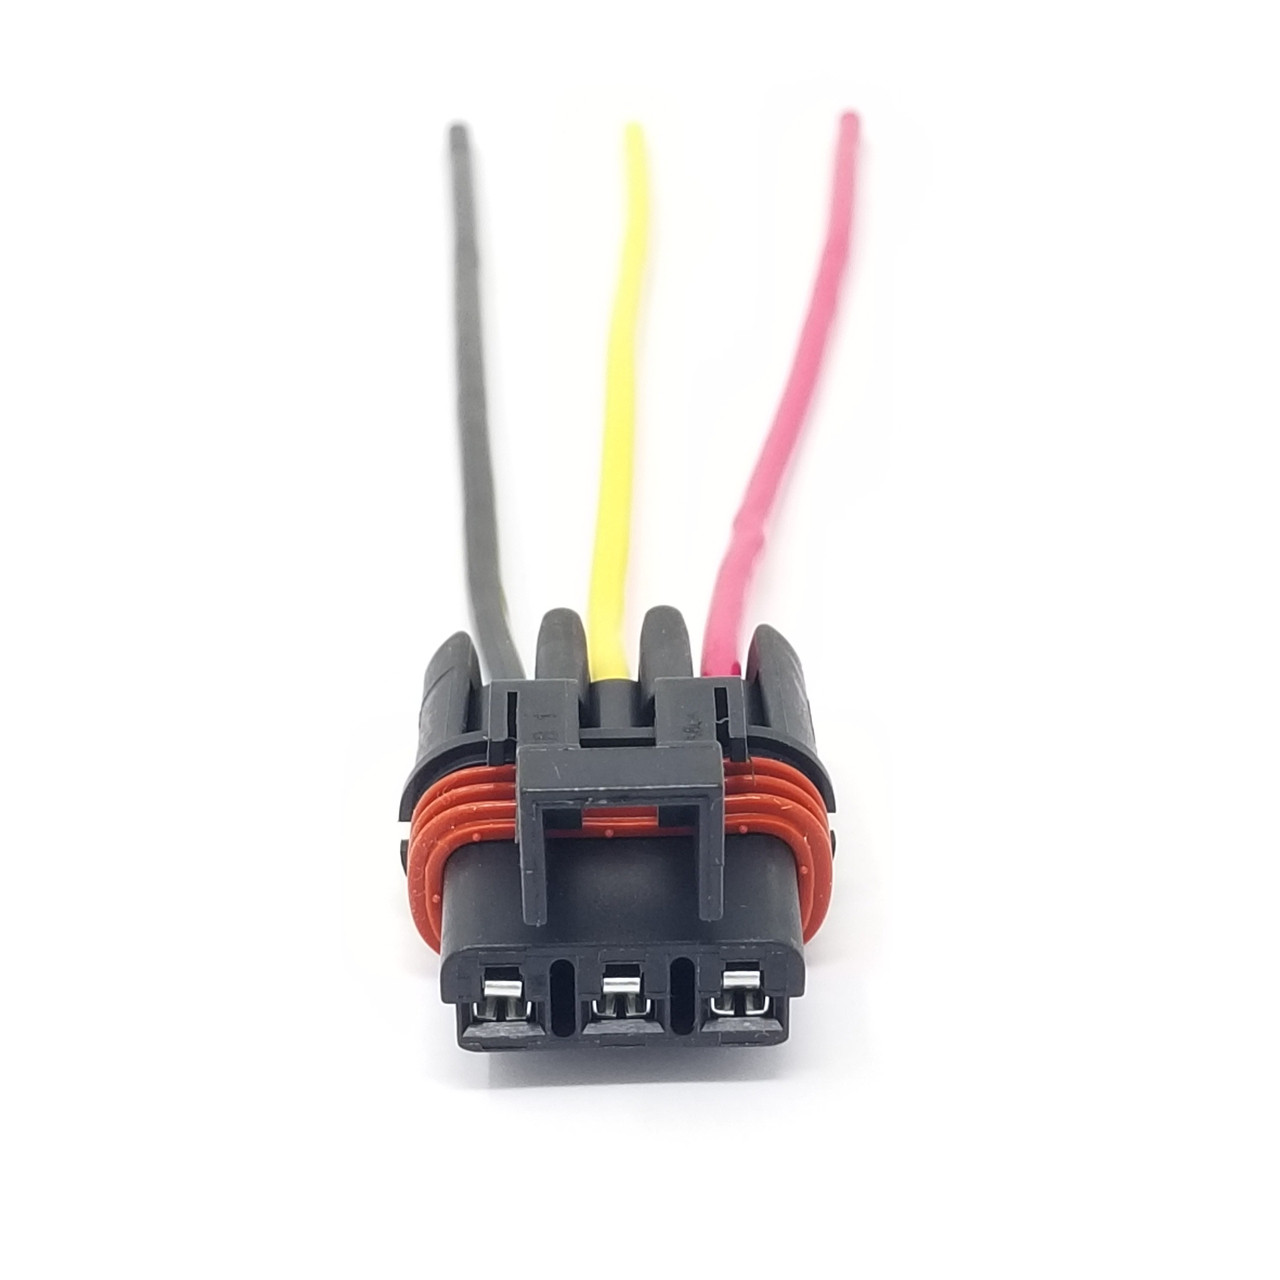 Polaris Pulse Connector with 6'' pigtail.  Pigtail is 16ga 40 strand wire.  IP67 rated seal for waterproofing.